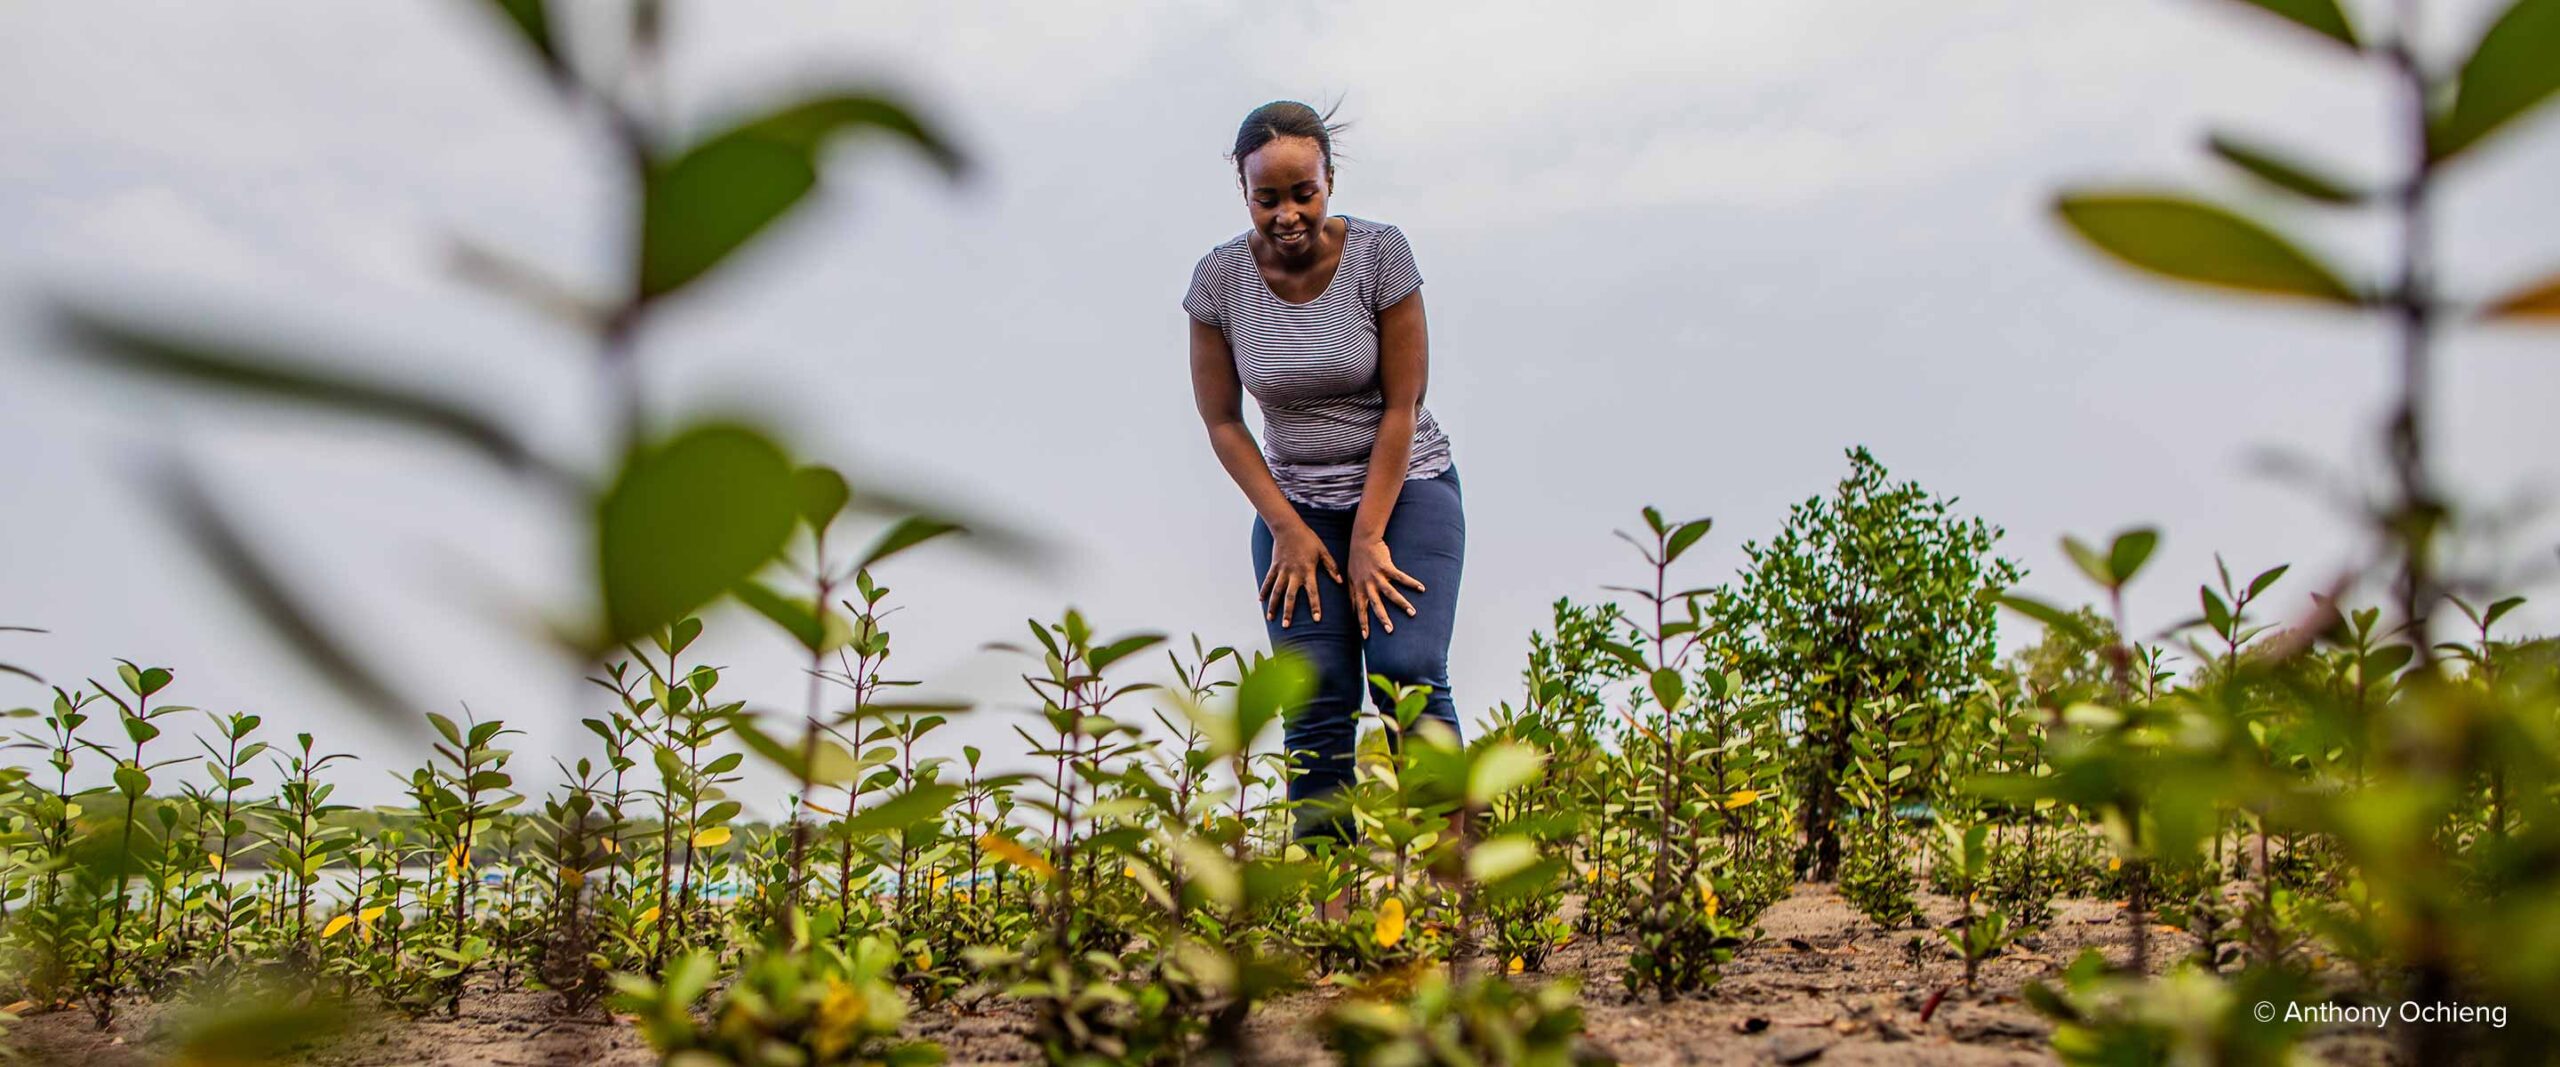 Kenya Blue Forests carbon project - woman with mangroves - credit Anthony Ochieng